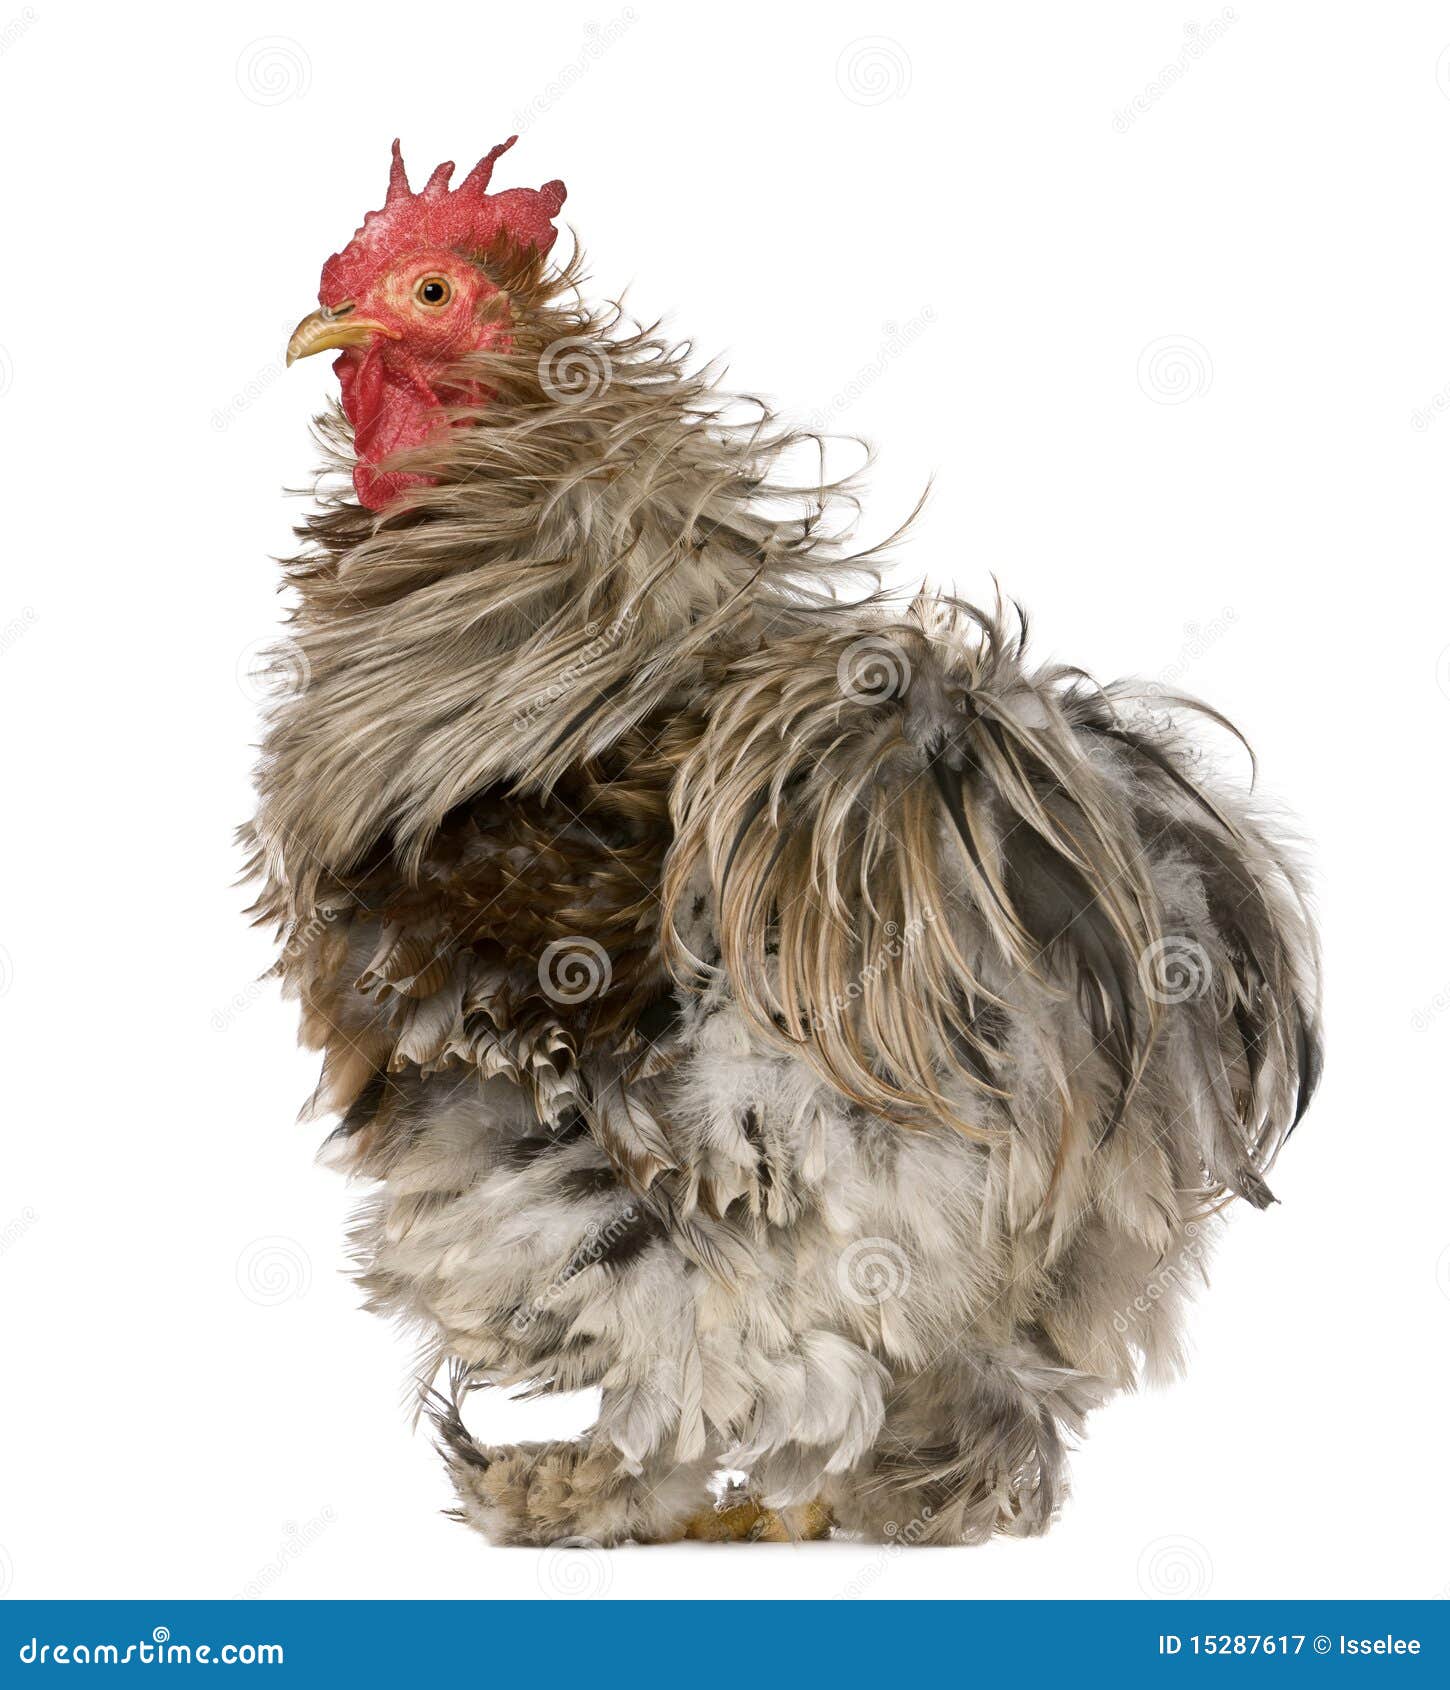 curly feathered rooster pekin, 1 year old